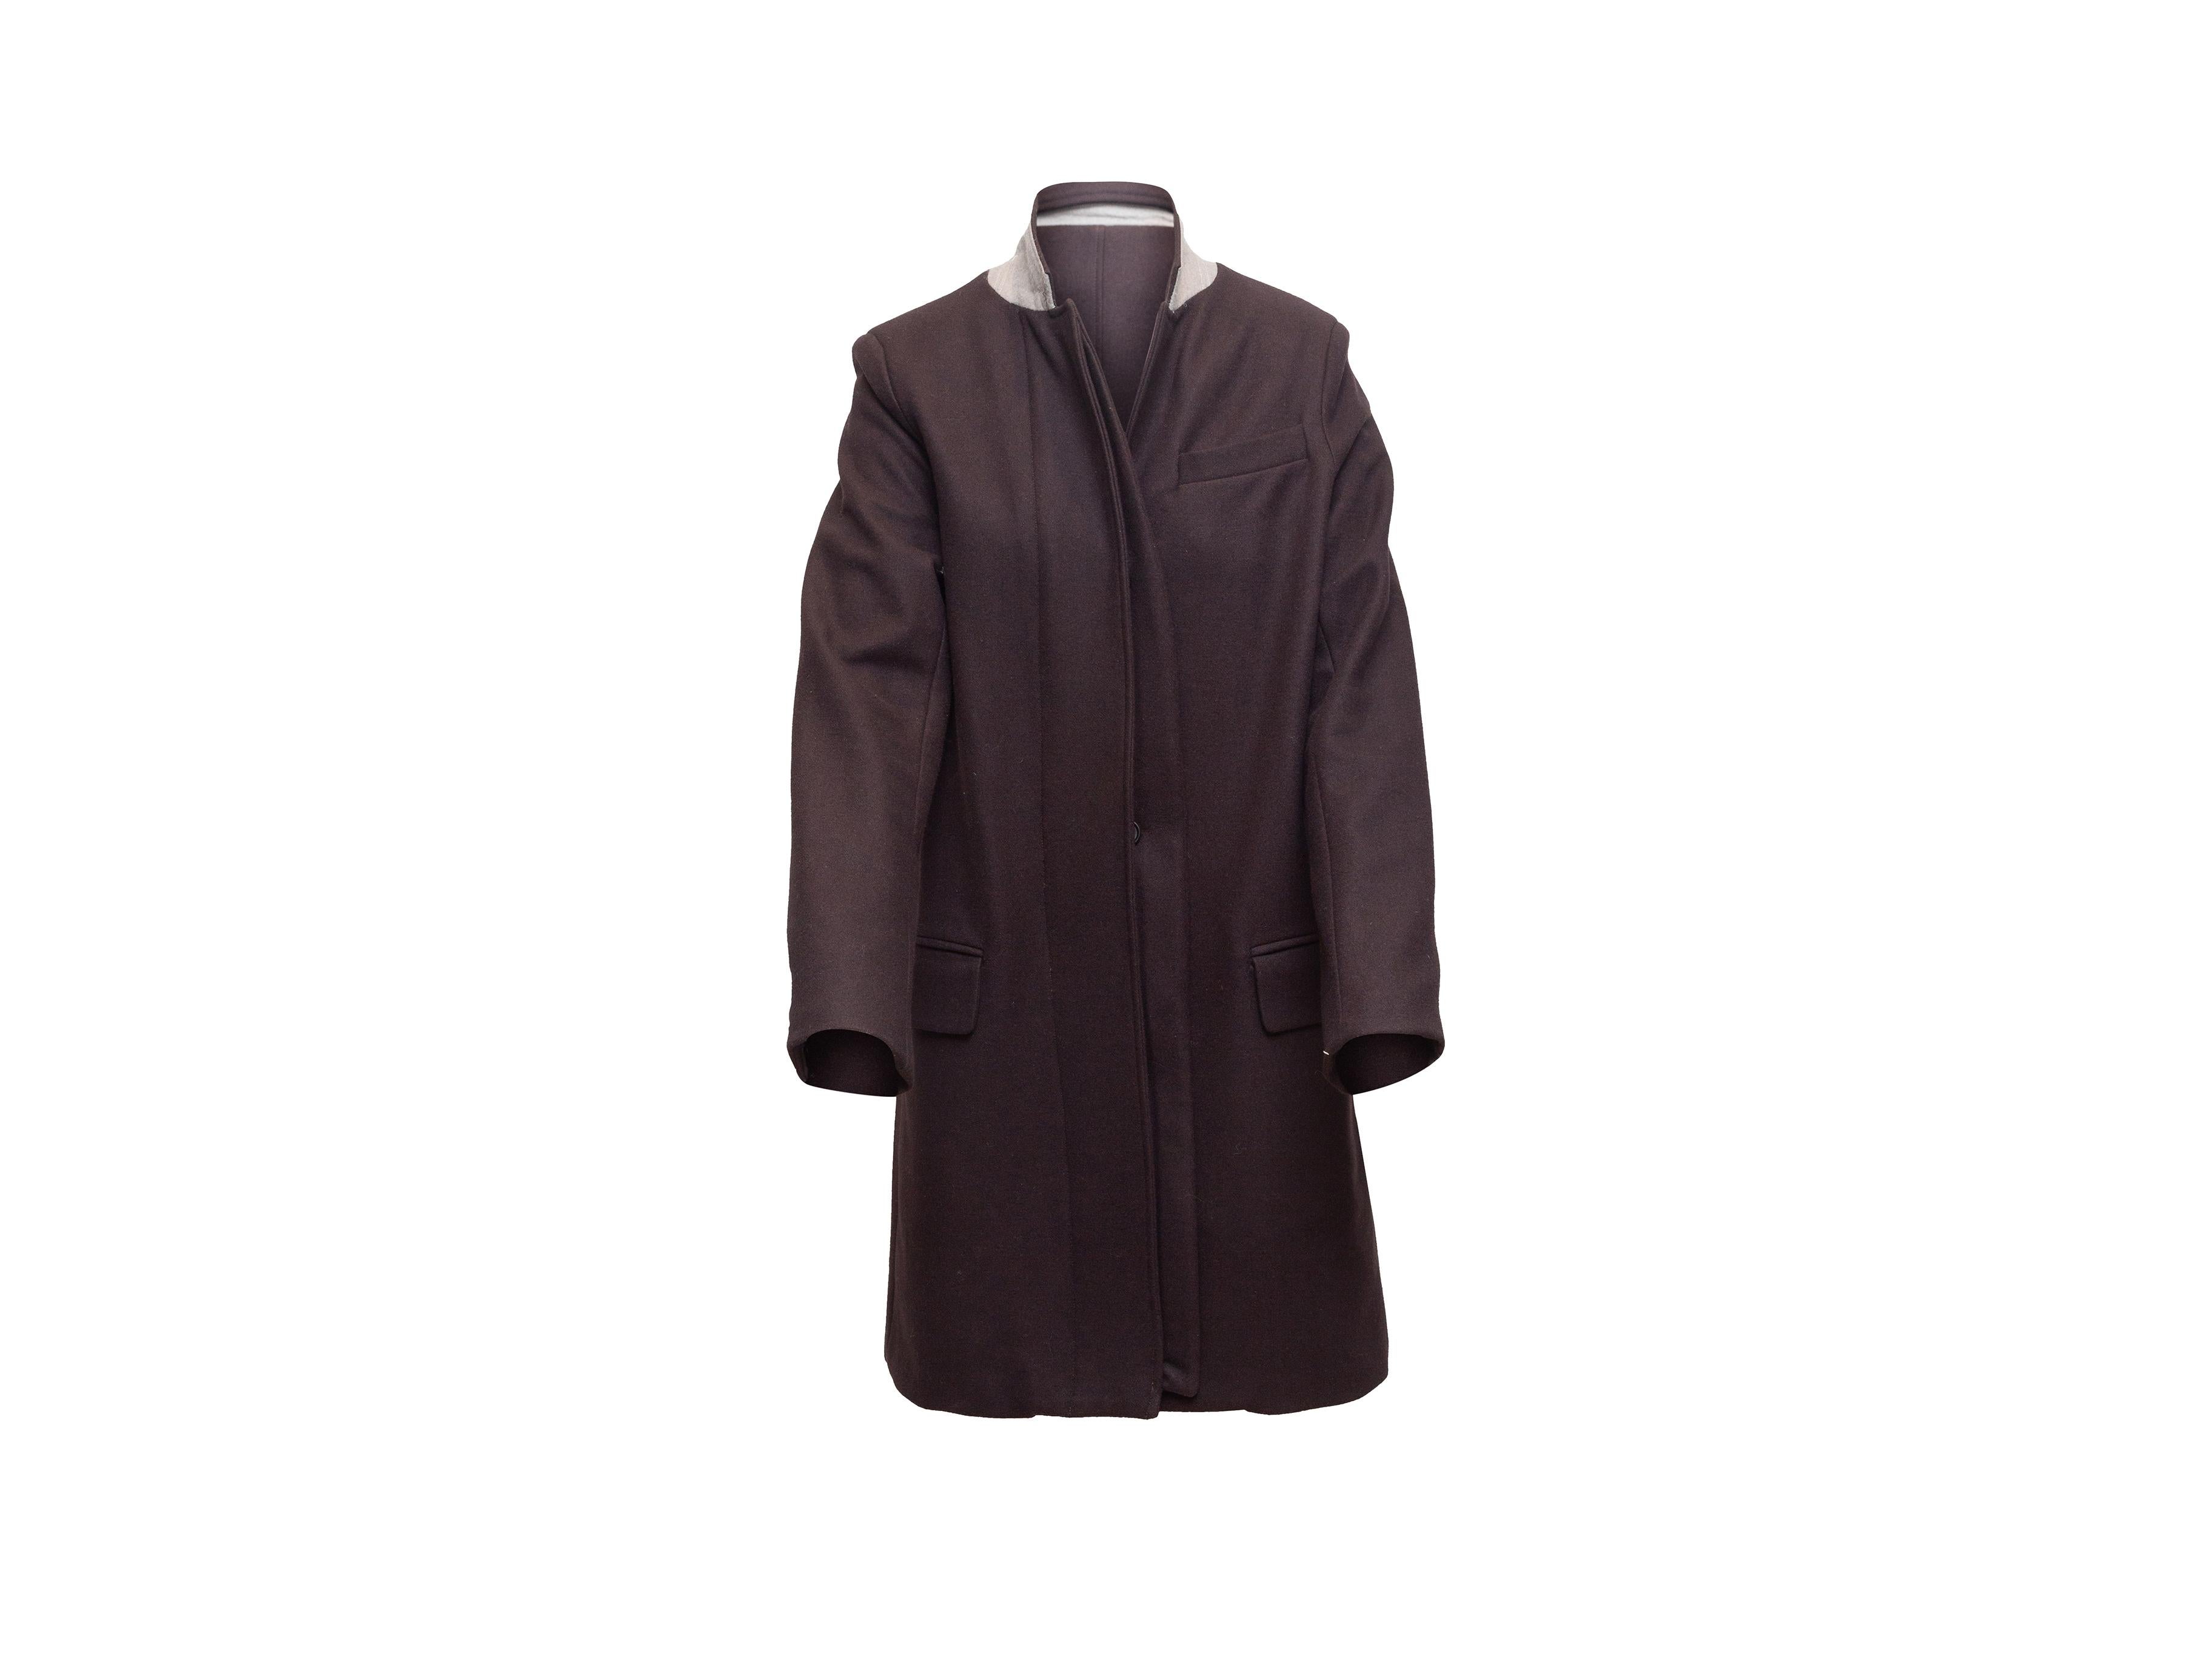 Product details: Dark purple long virgin wool coat by A.L.C. Shawl collar. Three pockets. Concealed button closures at front. 34